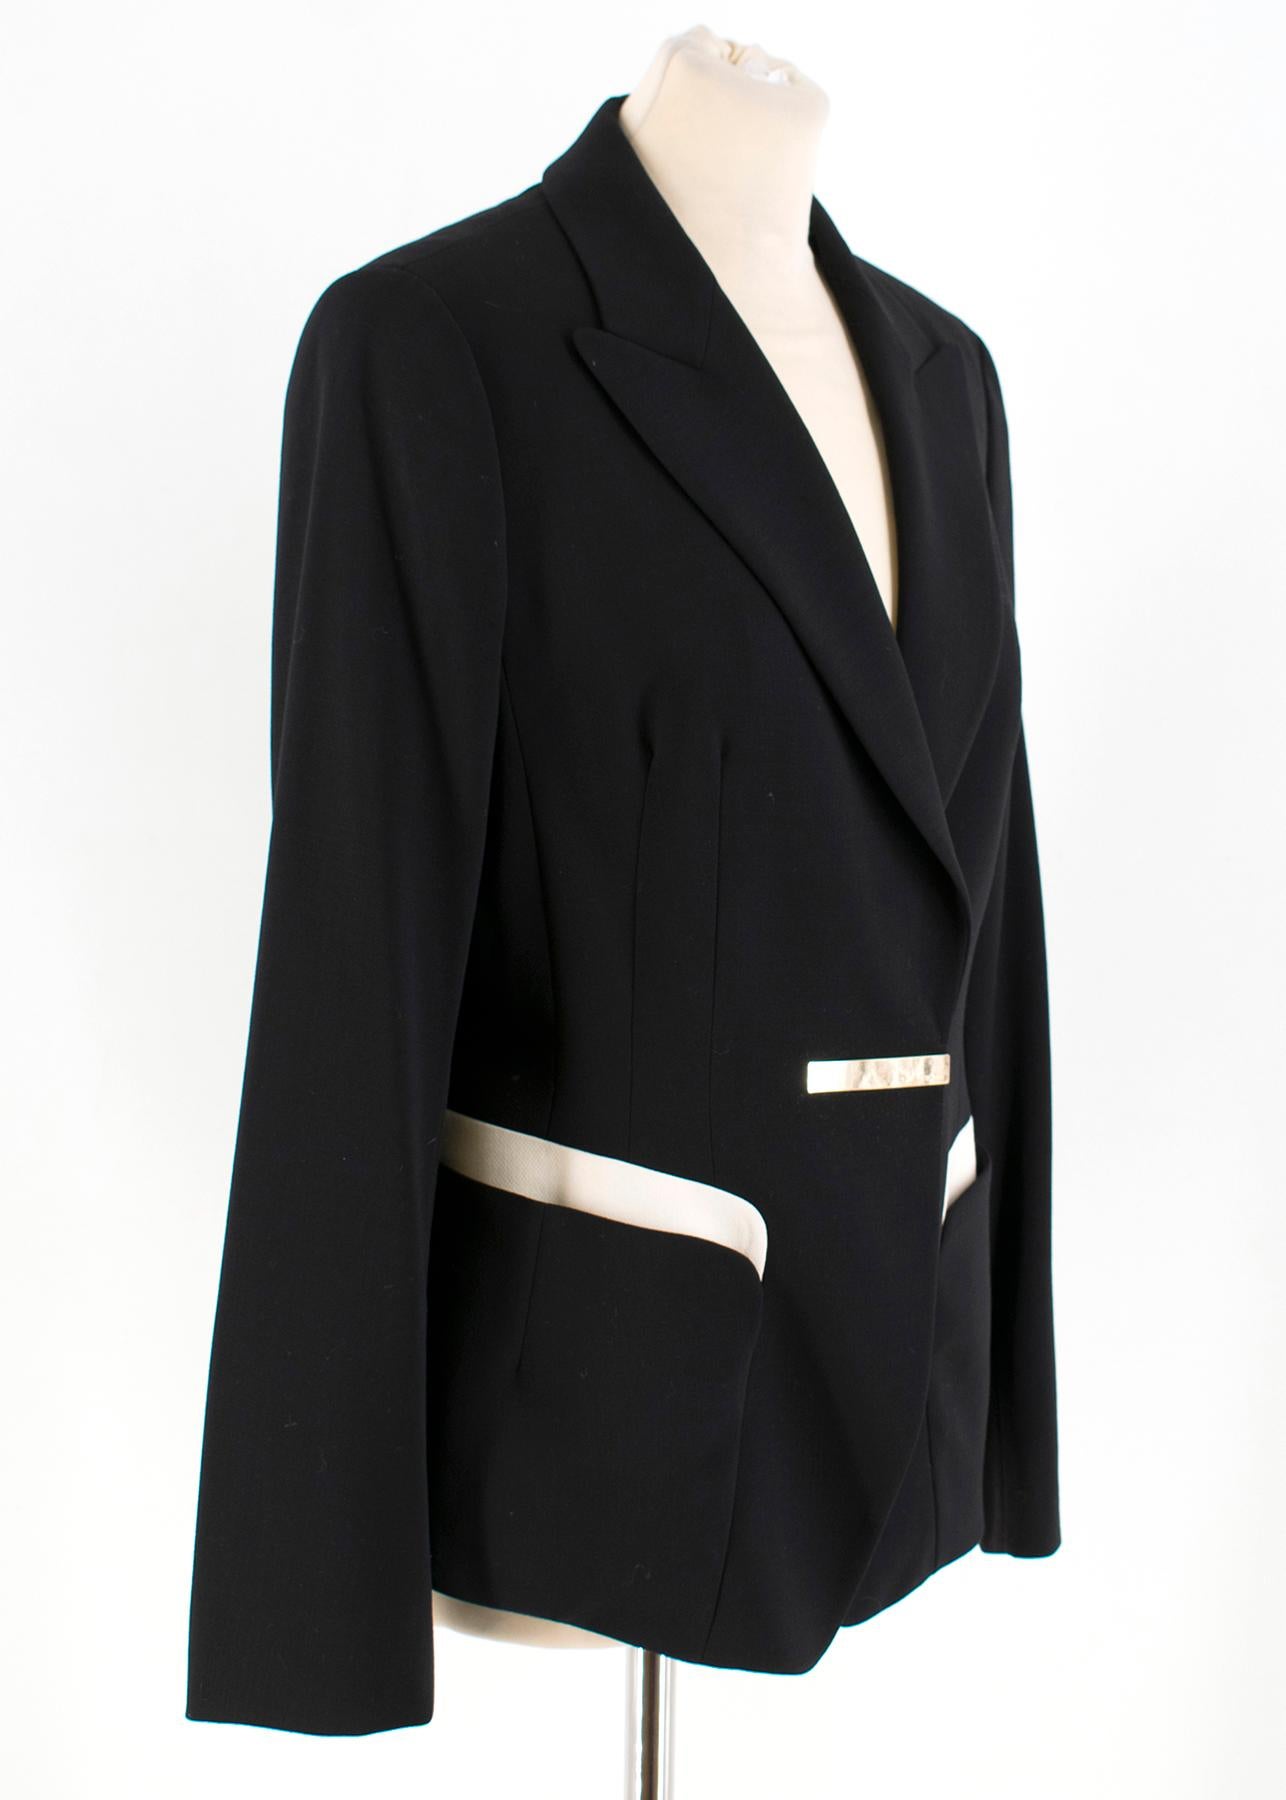 Escada Black Paneled Blazer 

- Black 100% Wool Blazer 
- Peak Lapel
- Paneled seams down blazer 
- White detail side slip pockets 
- Push in clasp with gold toned detail 

Please note, these items are pre-owned and may show some signs of storage,